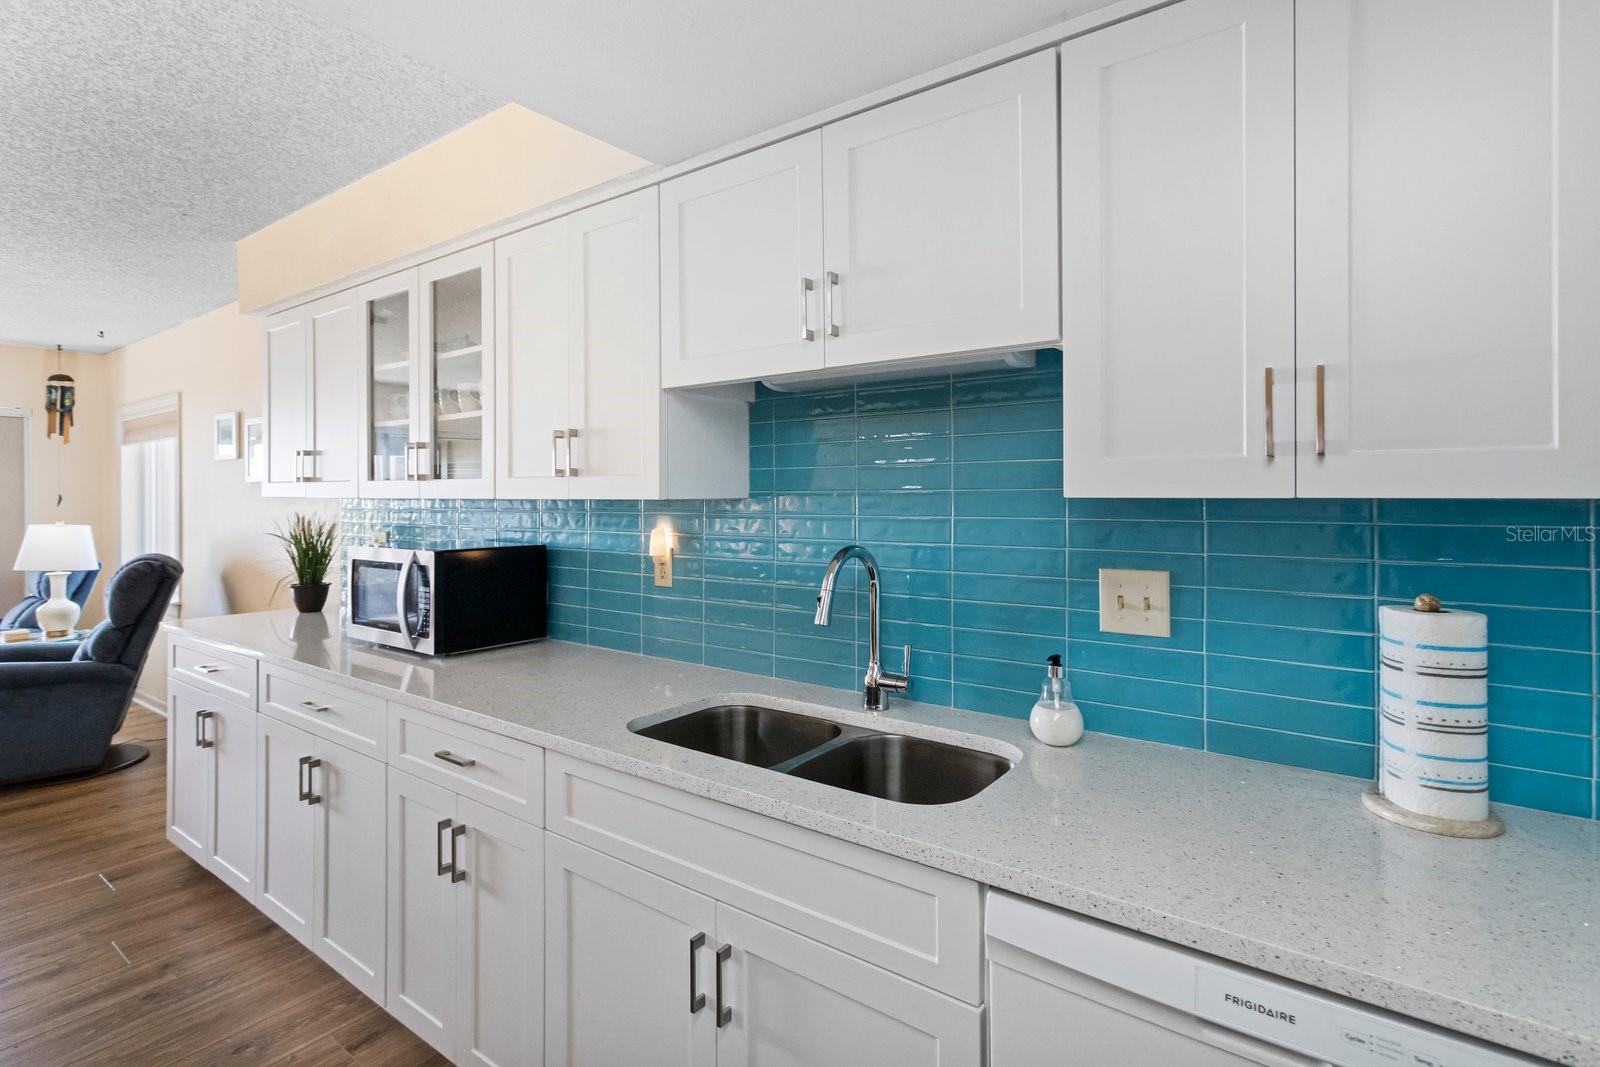 The gorgeous backsplash sparkles like the Gulf waters under the Florida sun.